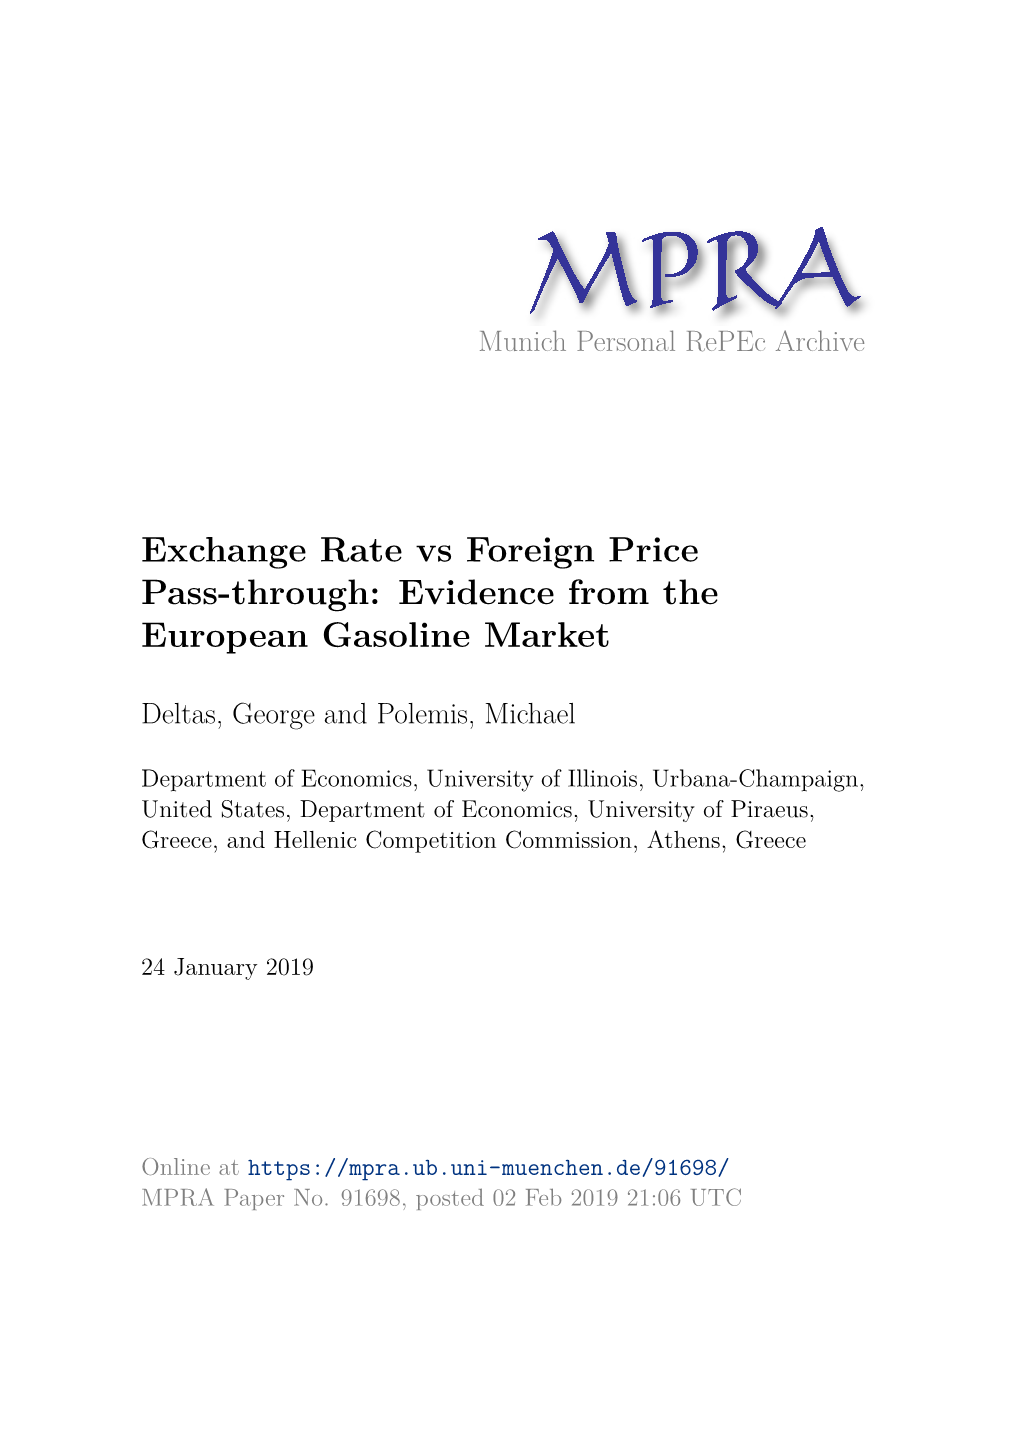 Exchange Rate Vs Foreign Price Pass-Through: Evidence from the European Gasoline Market